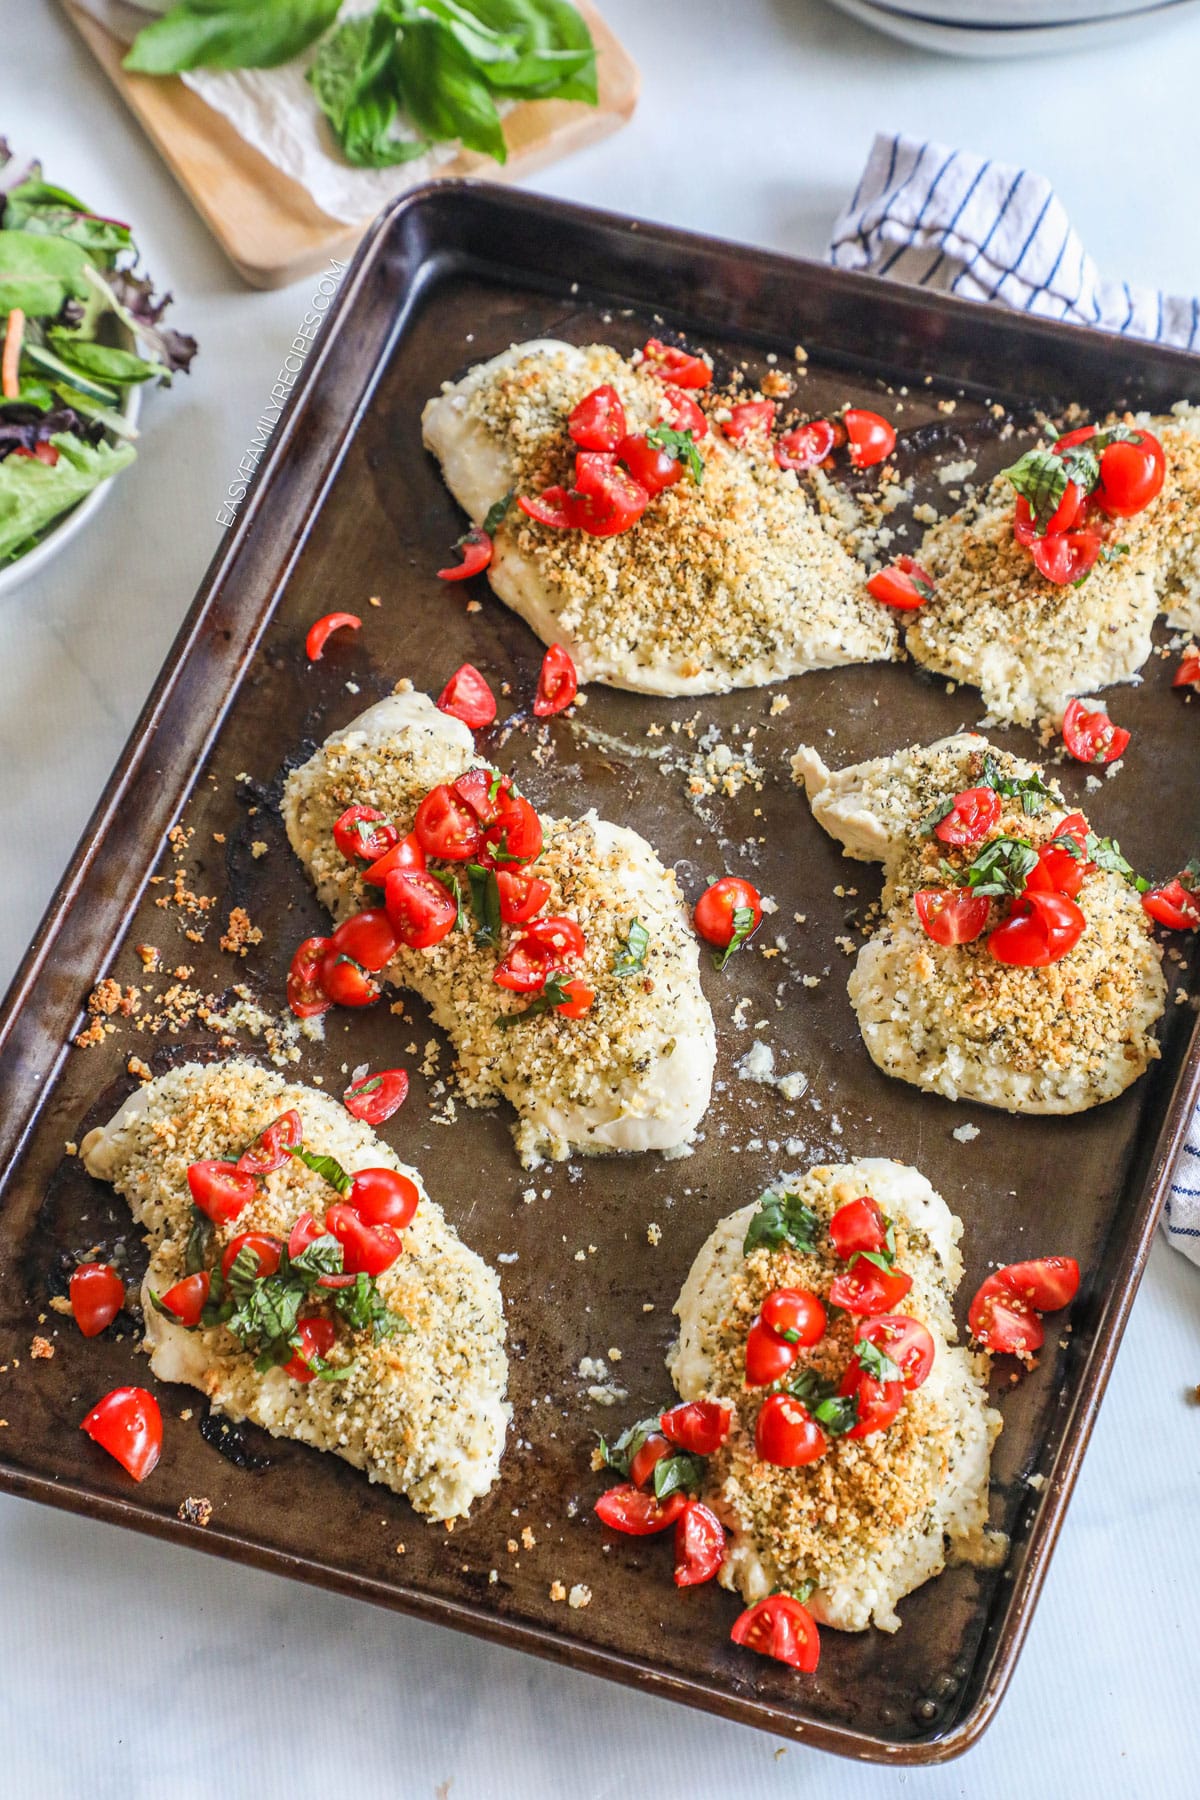 Sheet pan with baked Italian chicken topped with crispy panko, tomatoes, and basil